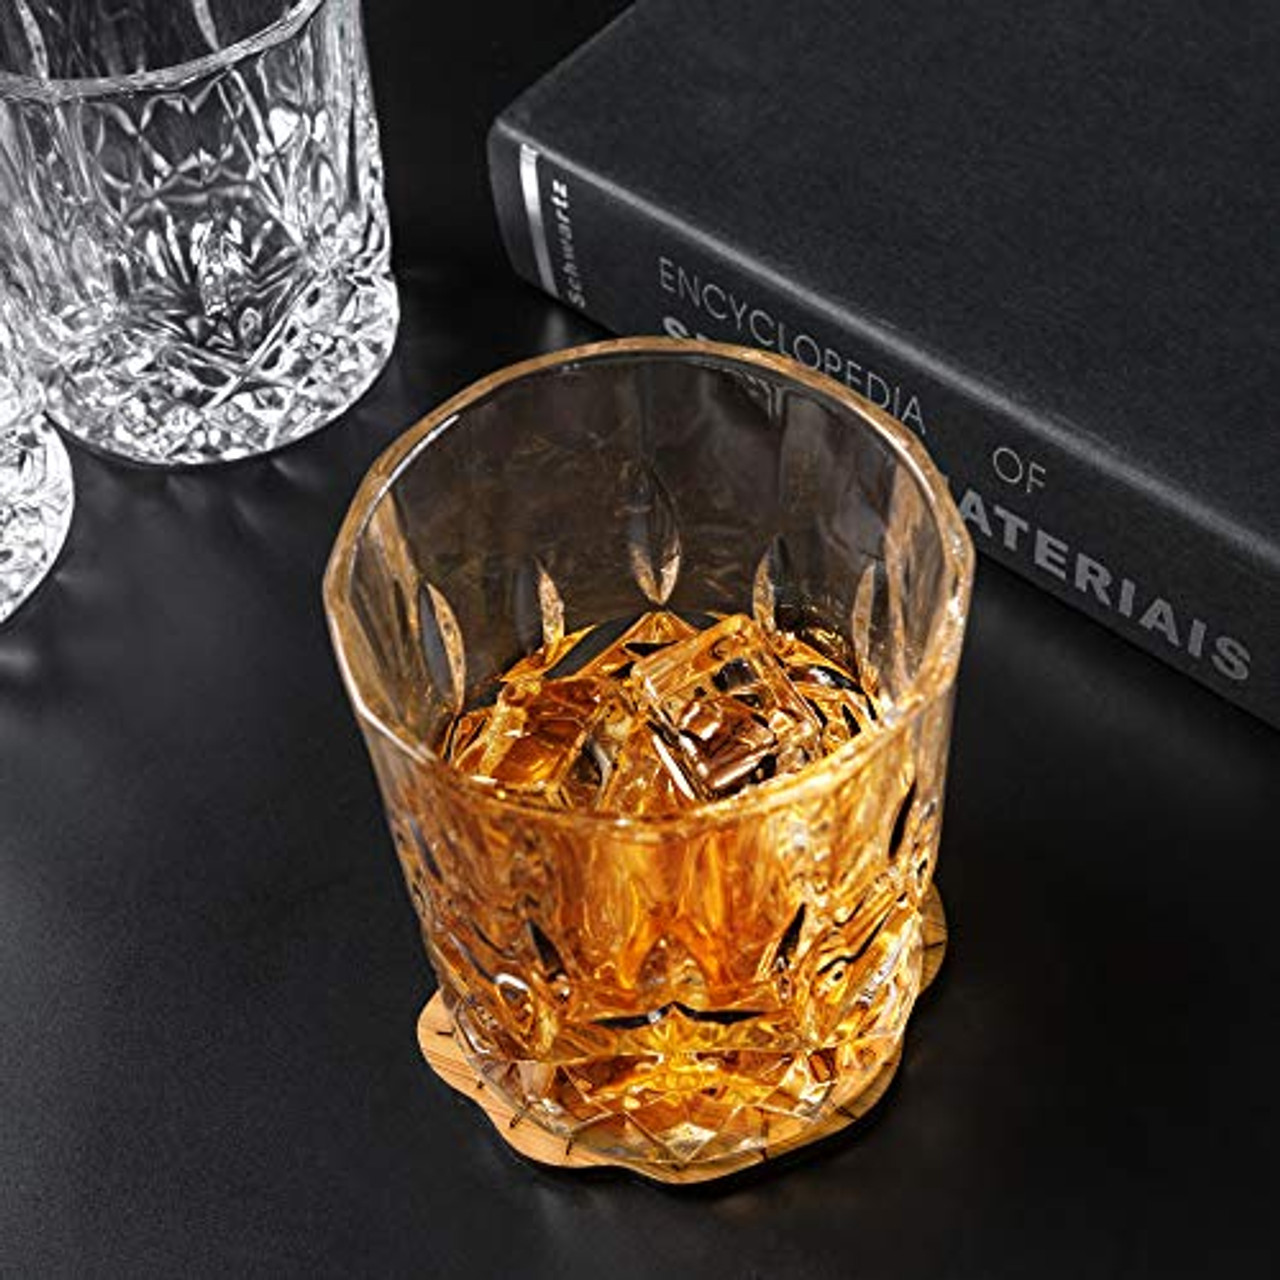 True Square Double Old Fashioned Glasses Set of 4 - Lowball Whiskey Glasses  for Cocktails, Drinks or Liquor - Dishwasher Safe 10oz 